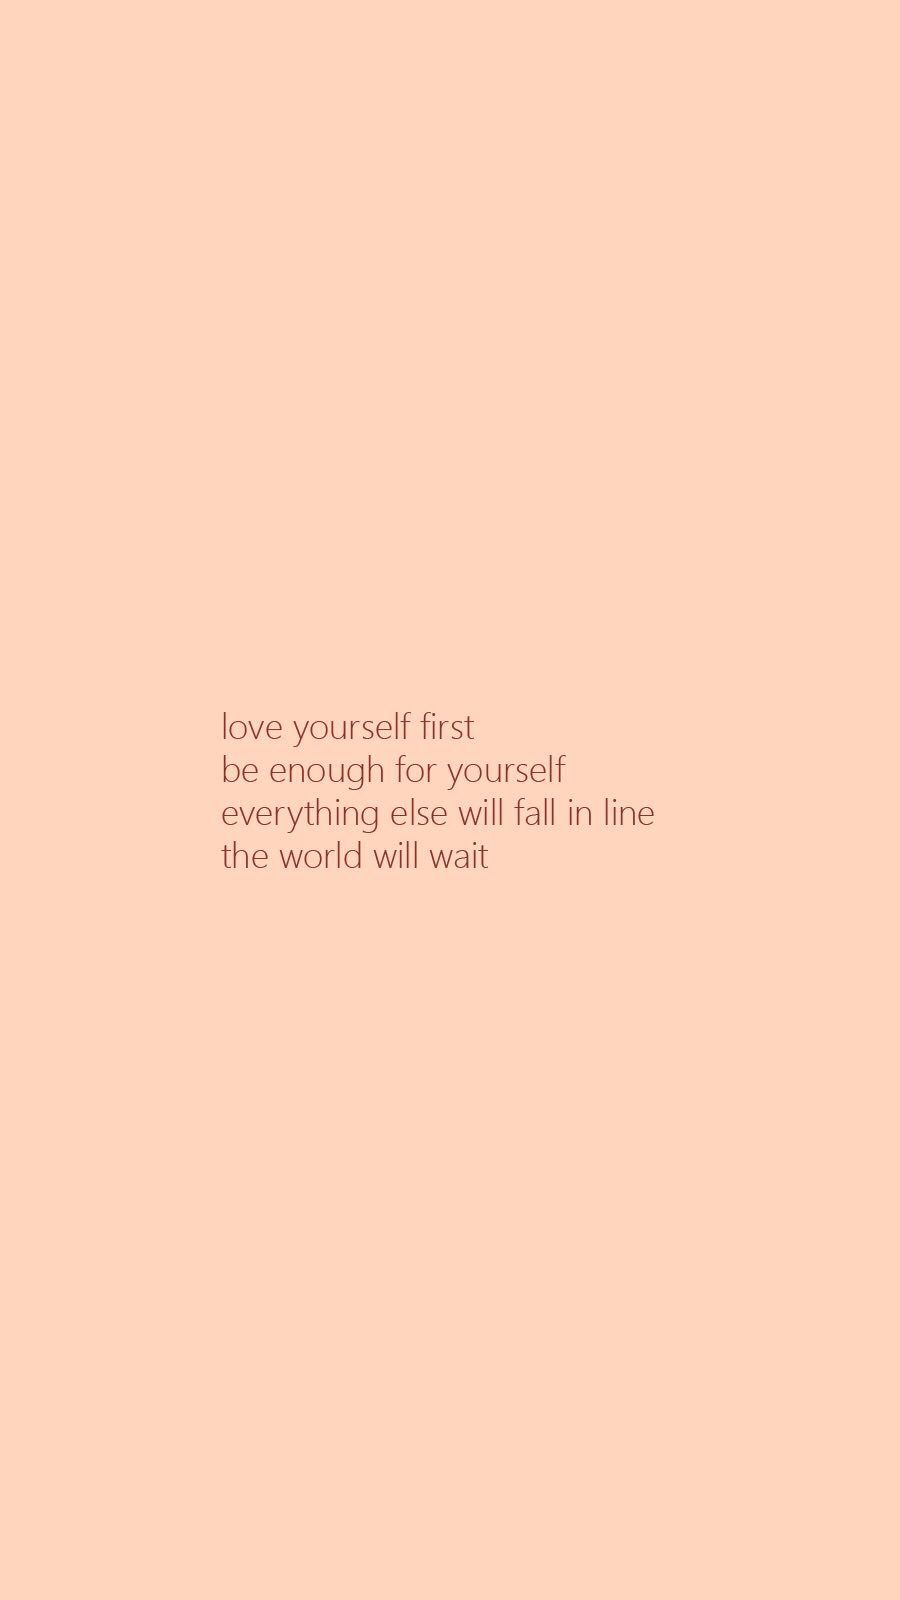  Frauenpower Hintergrundbild 900x1600. Self love first wallpaper. Love yourself first quotes, Love you more quotes, Quote aesthetic